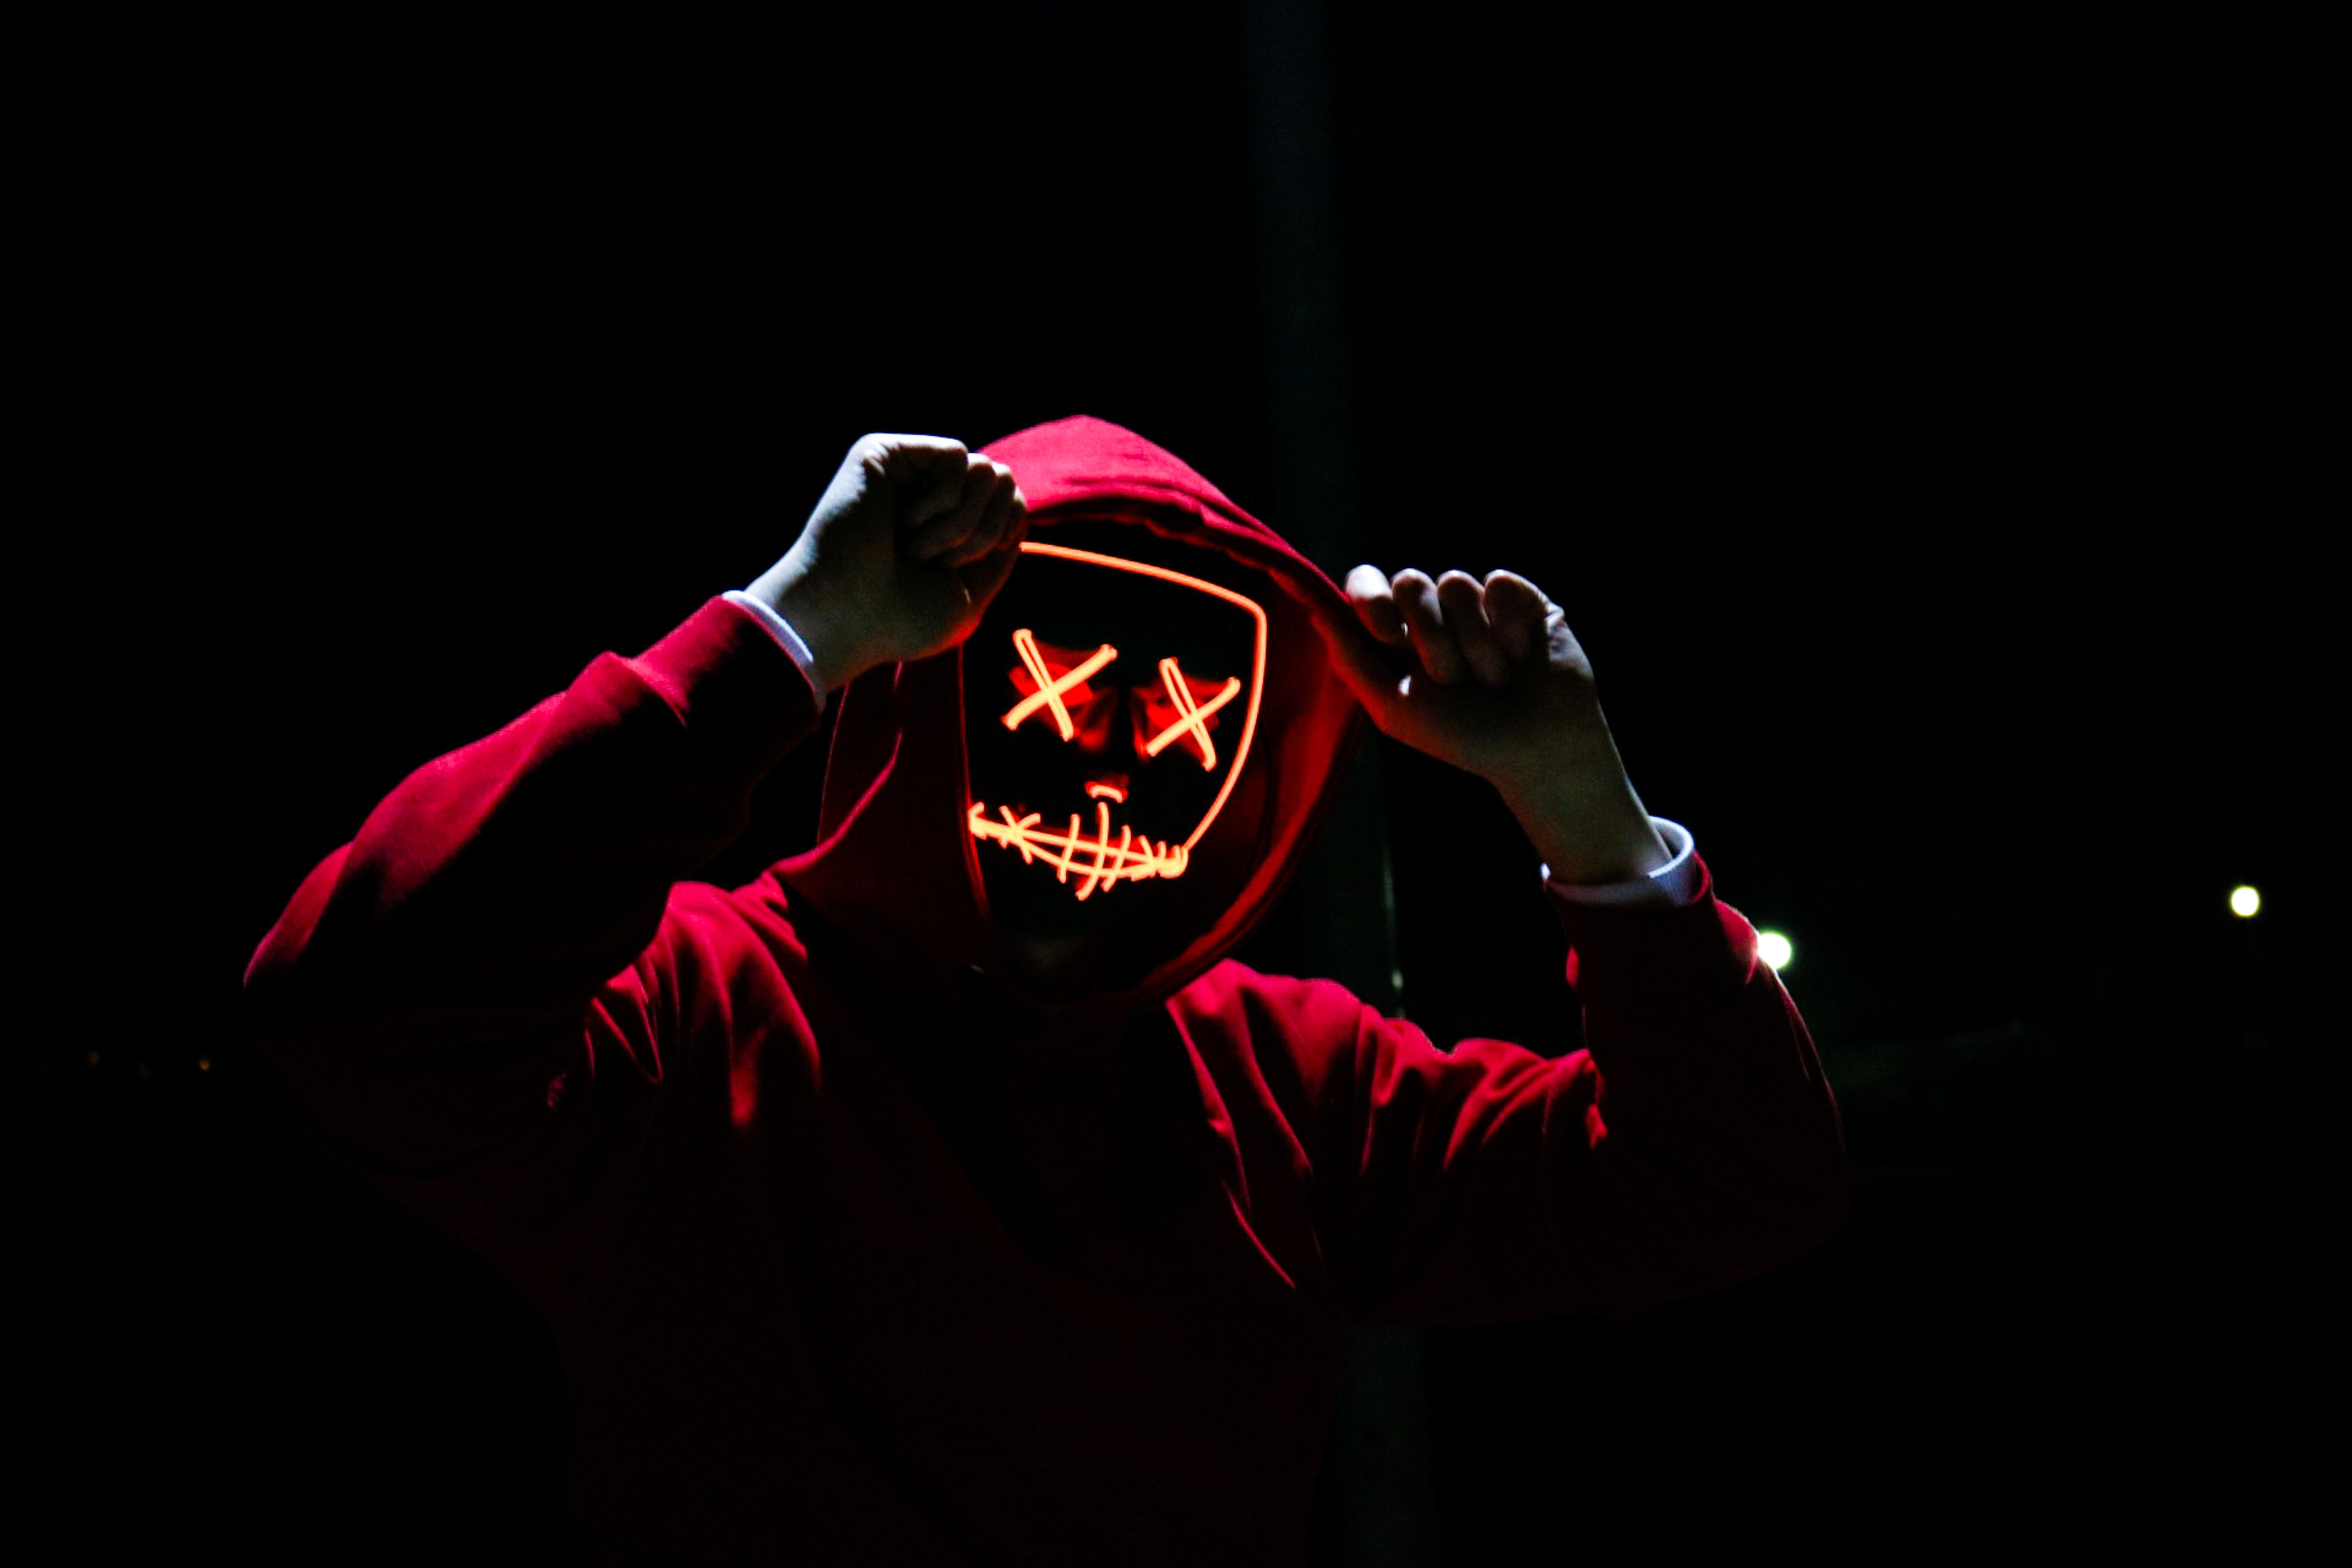 5999x3999 #red, #skull face, #mask, #illustration, #cool, #illuminated, #dead, #lines, #creepy, #halloween pumpkin, #Free picture, #halloween, #hoodie, #dark background, #neon light, #face, #light, #person, #angry, #skull, #dark. Mocah.org HD